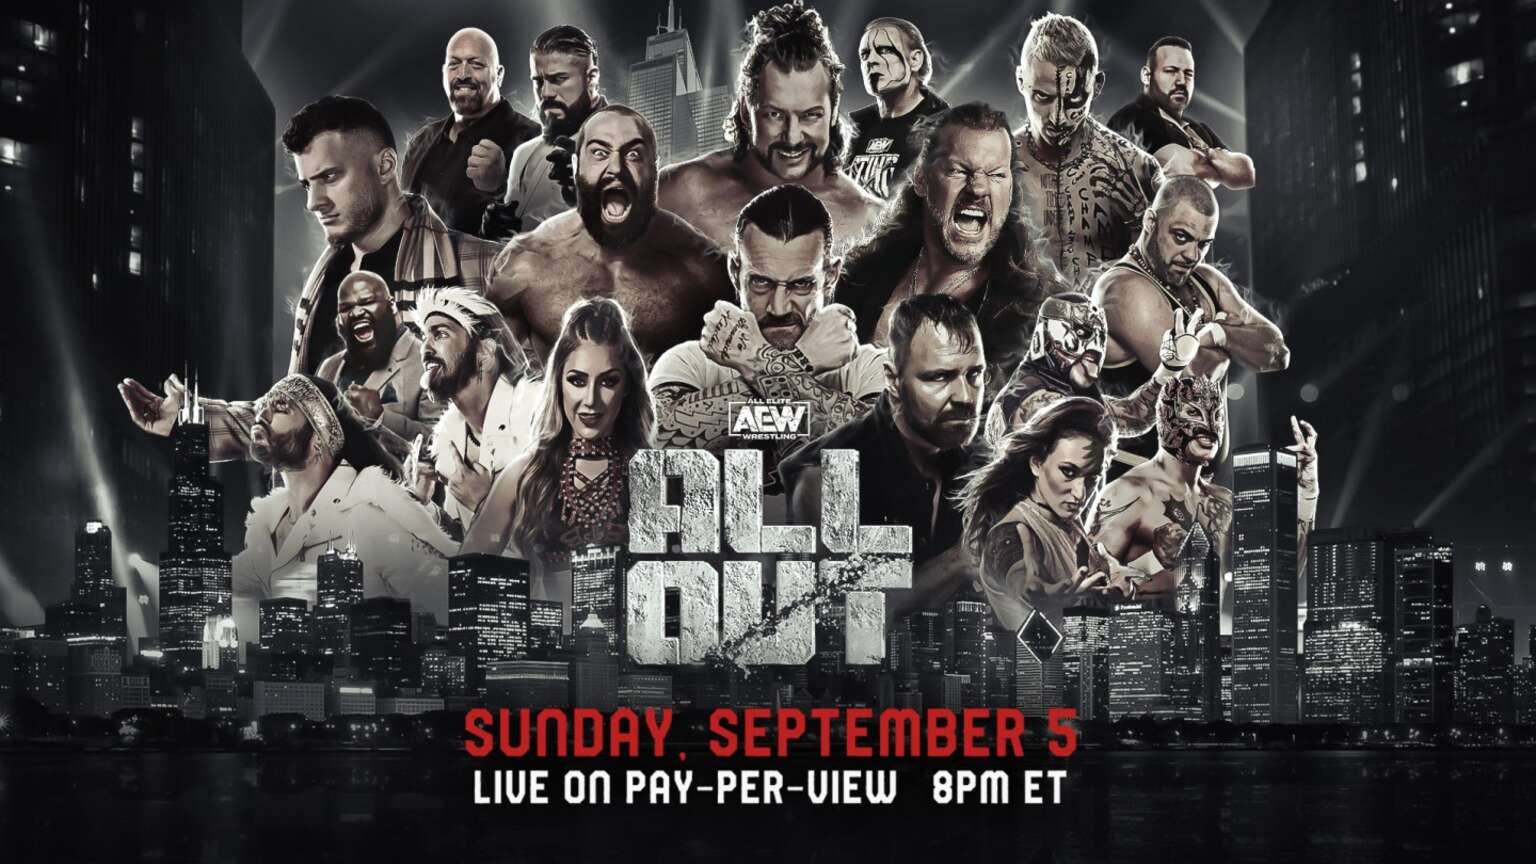 How to Watch 'AEW All Out' PPV Live Online on Apple TV, Roku, Fire TV